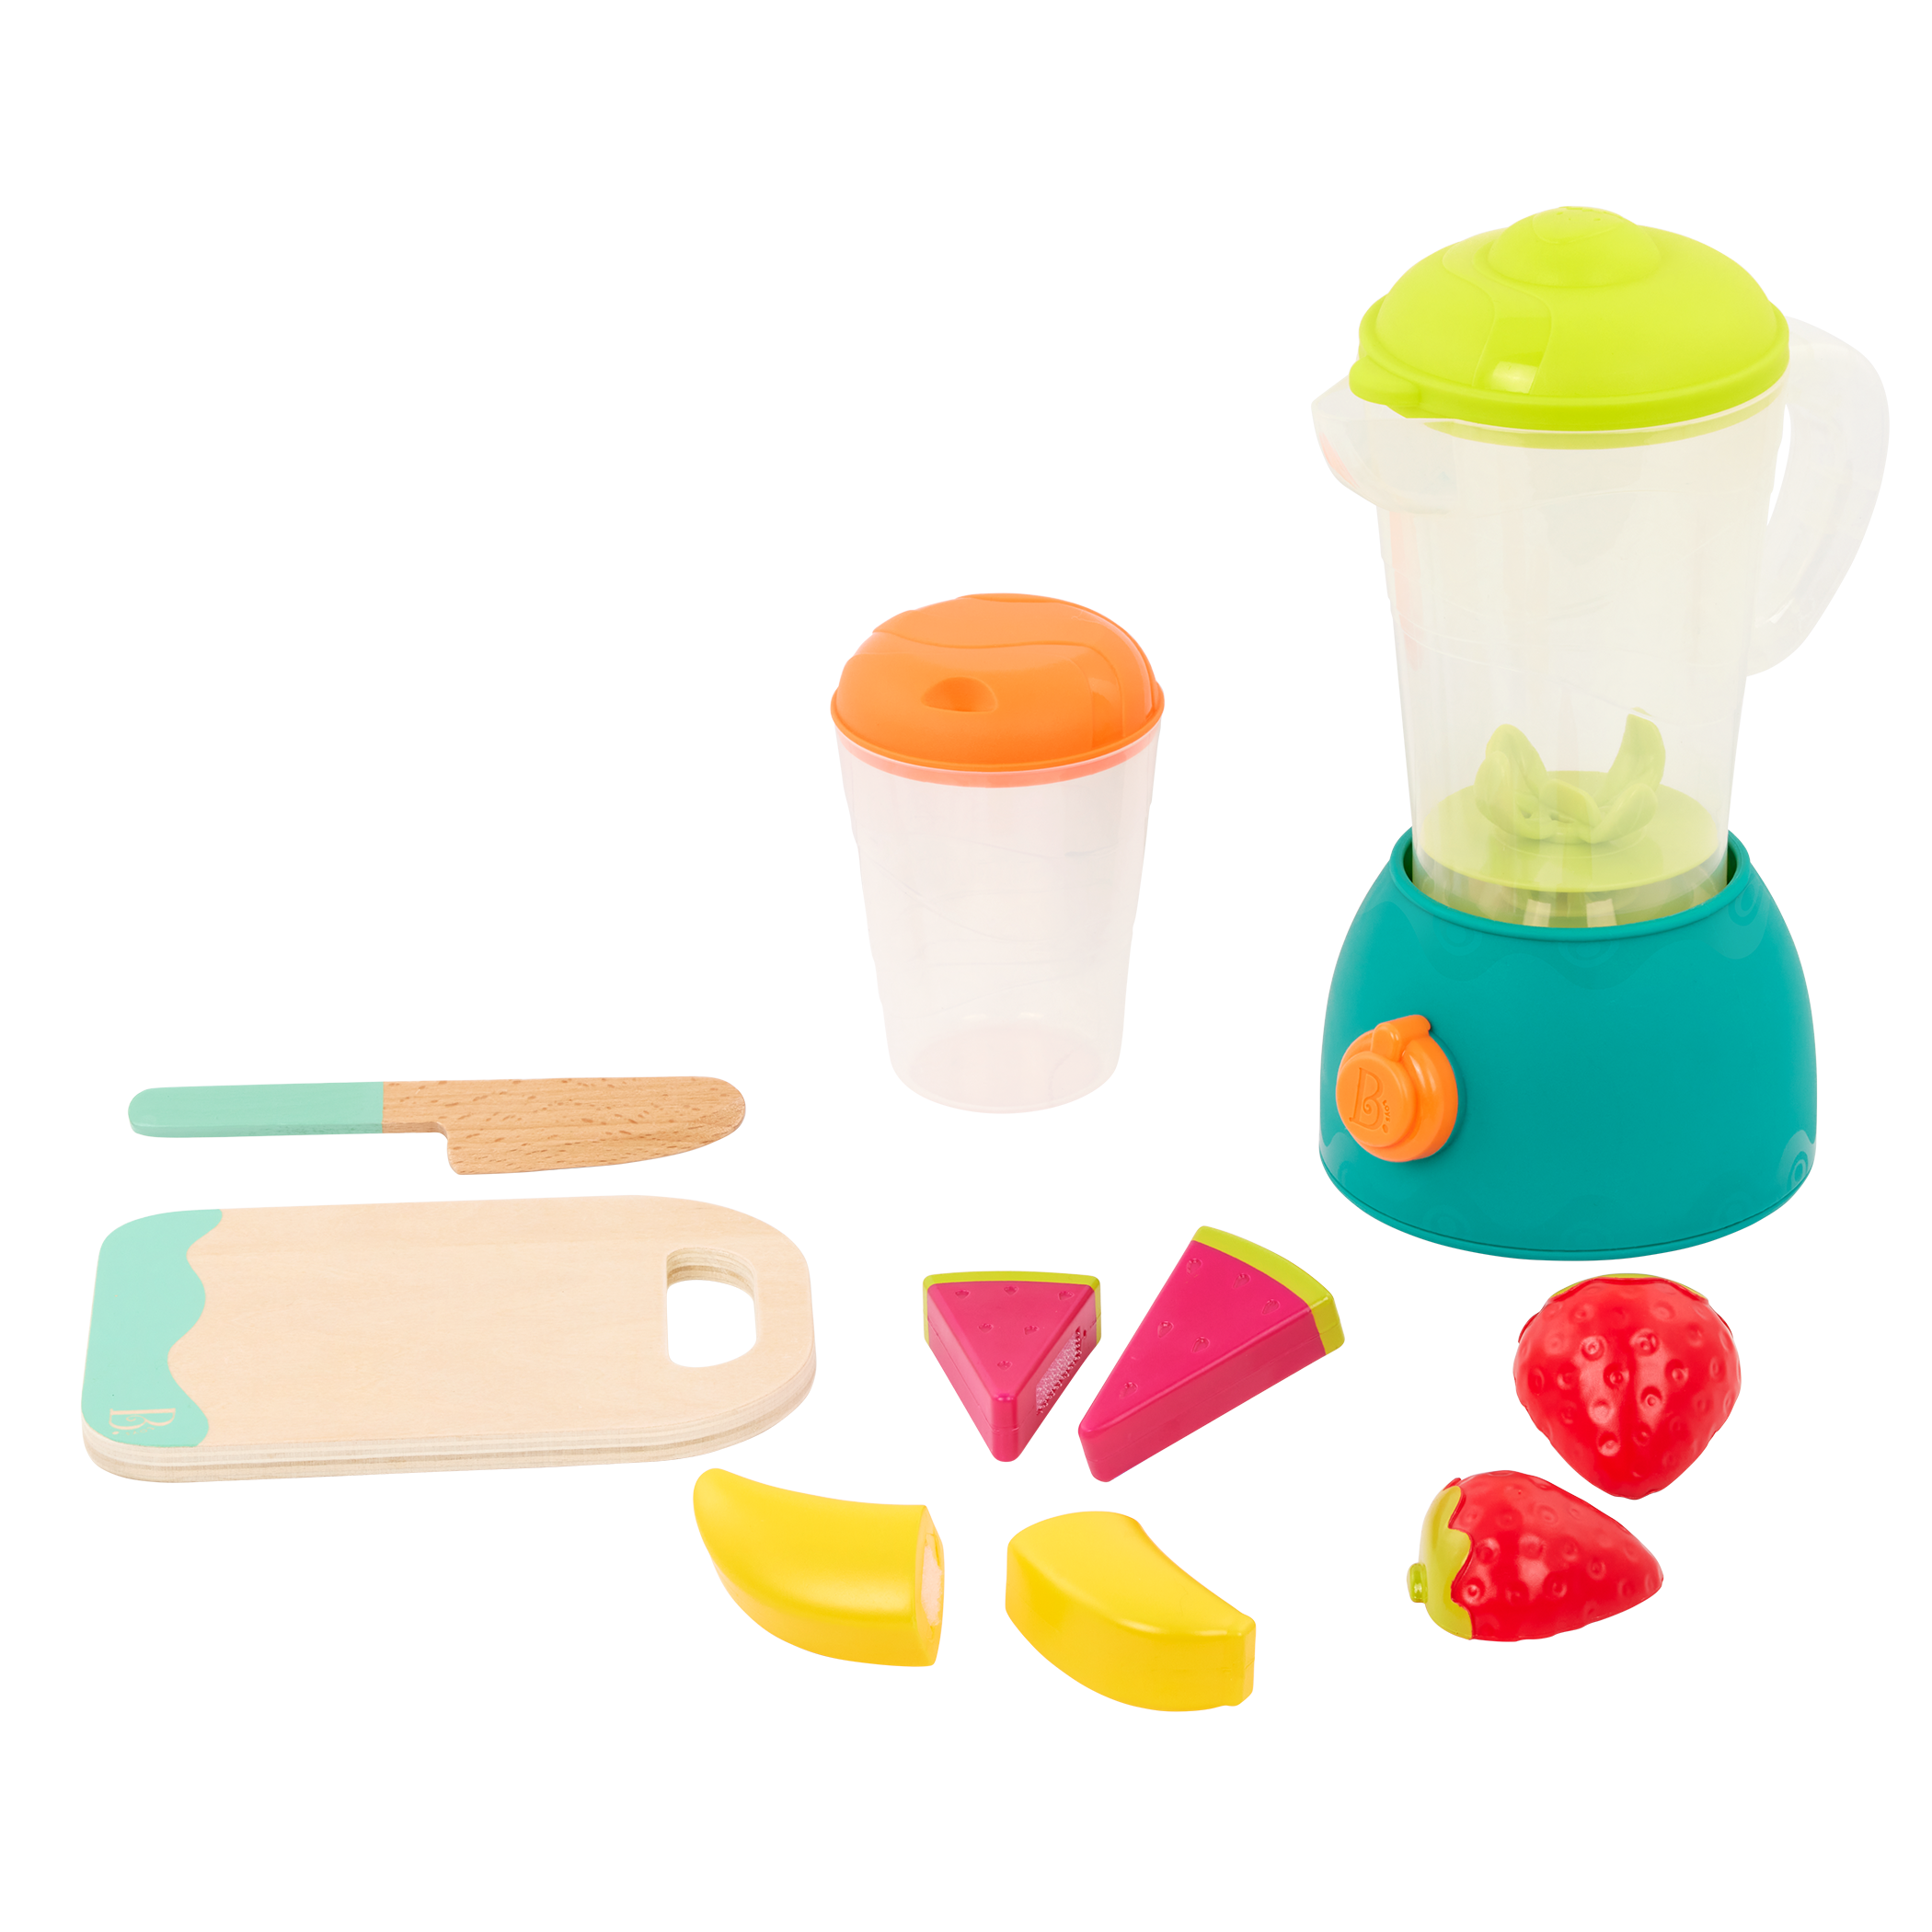 Yes Chef! Personal Blender with Travel Cup 